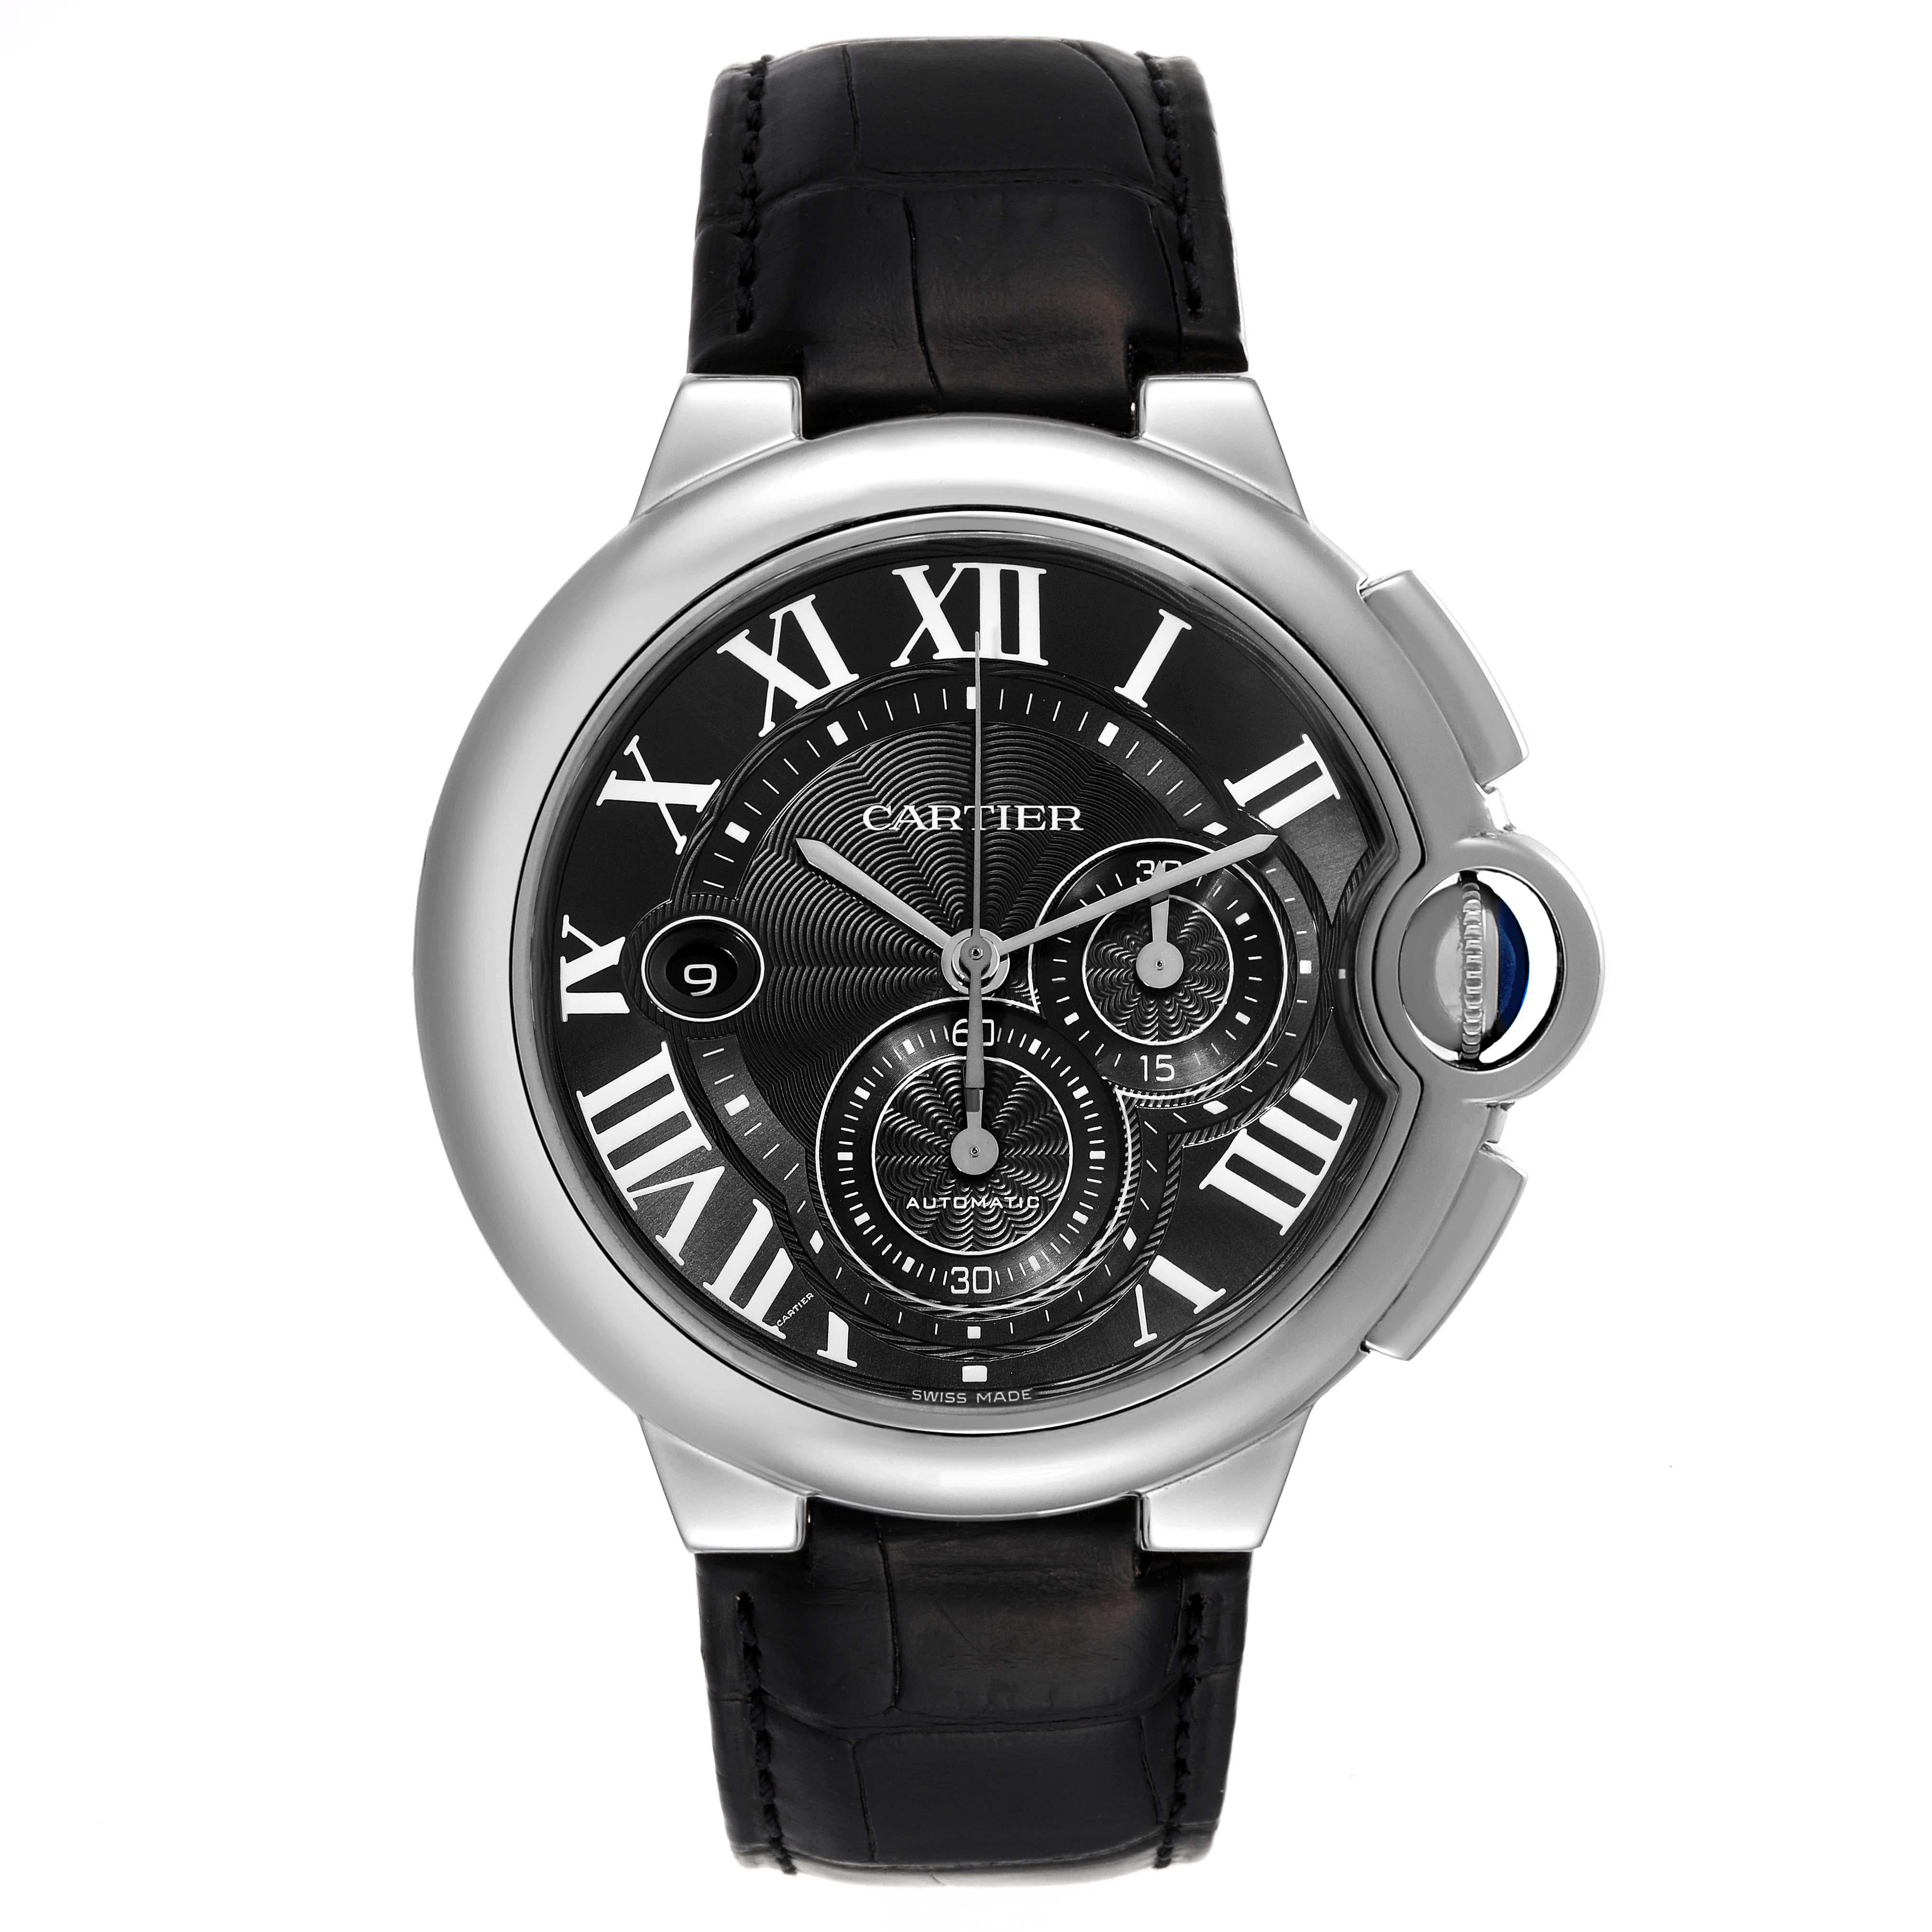 Cartier Ballon Bleu Black Dial Chronograph Steel Mens Watch W6920052. Automatic self-winding chronograph movement. Round stainless steel case 47.0 mm in diameter, 15 mm thick. Fluted 18k crown set with the blue spinel cabochon. Exhibition